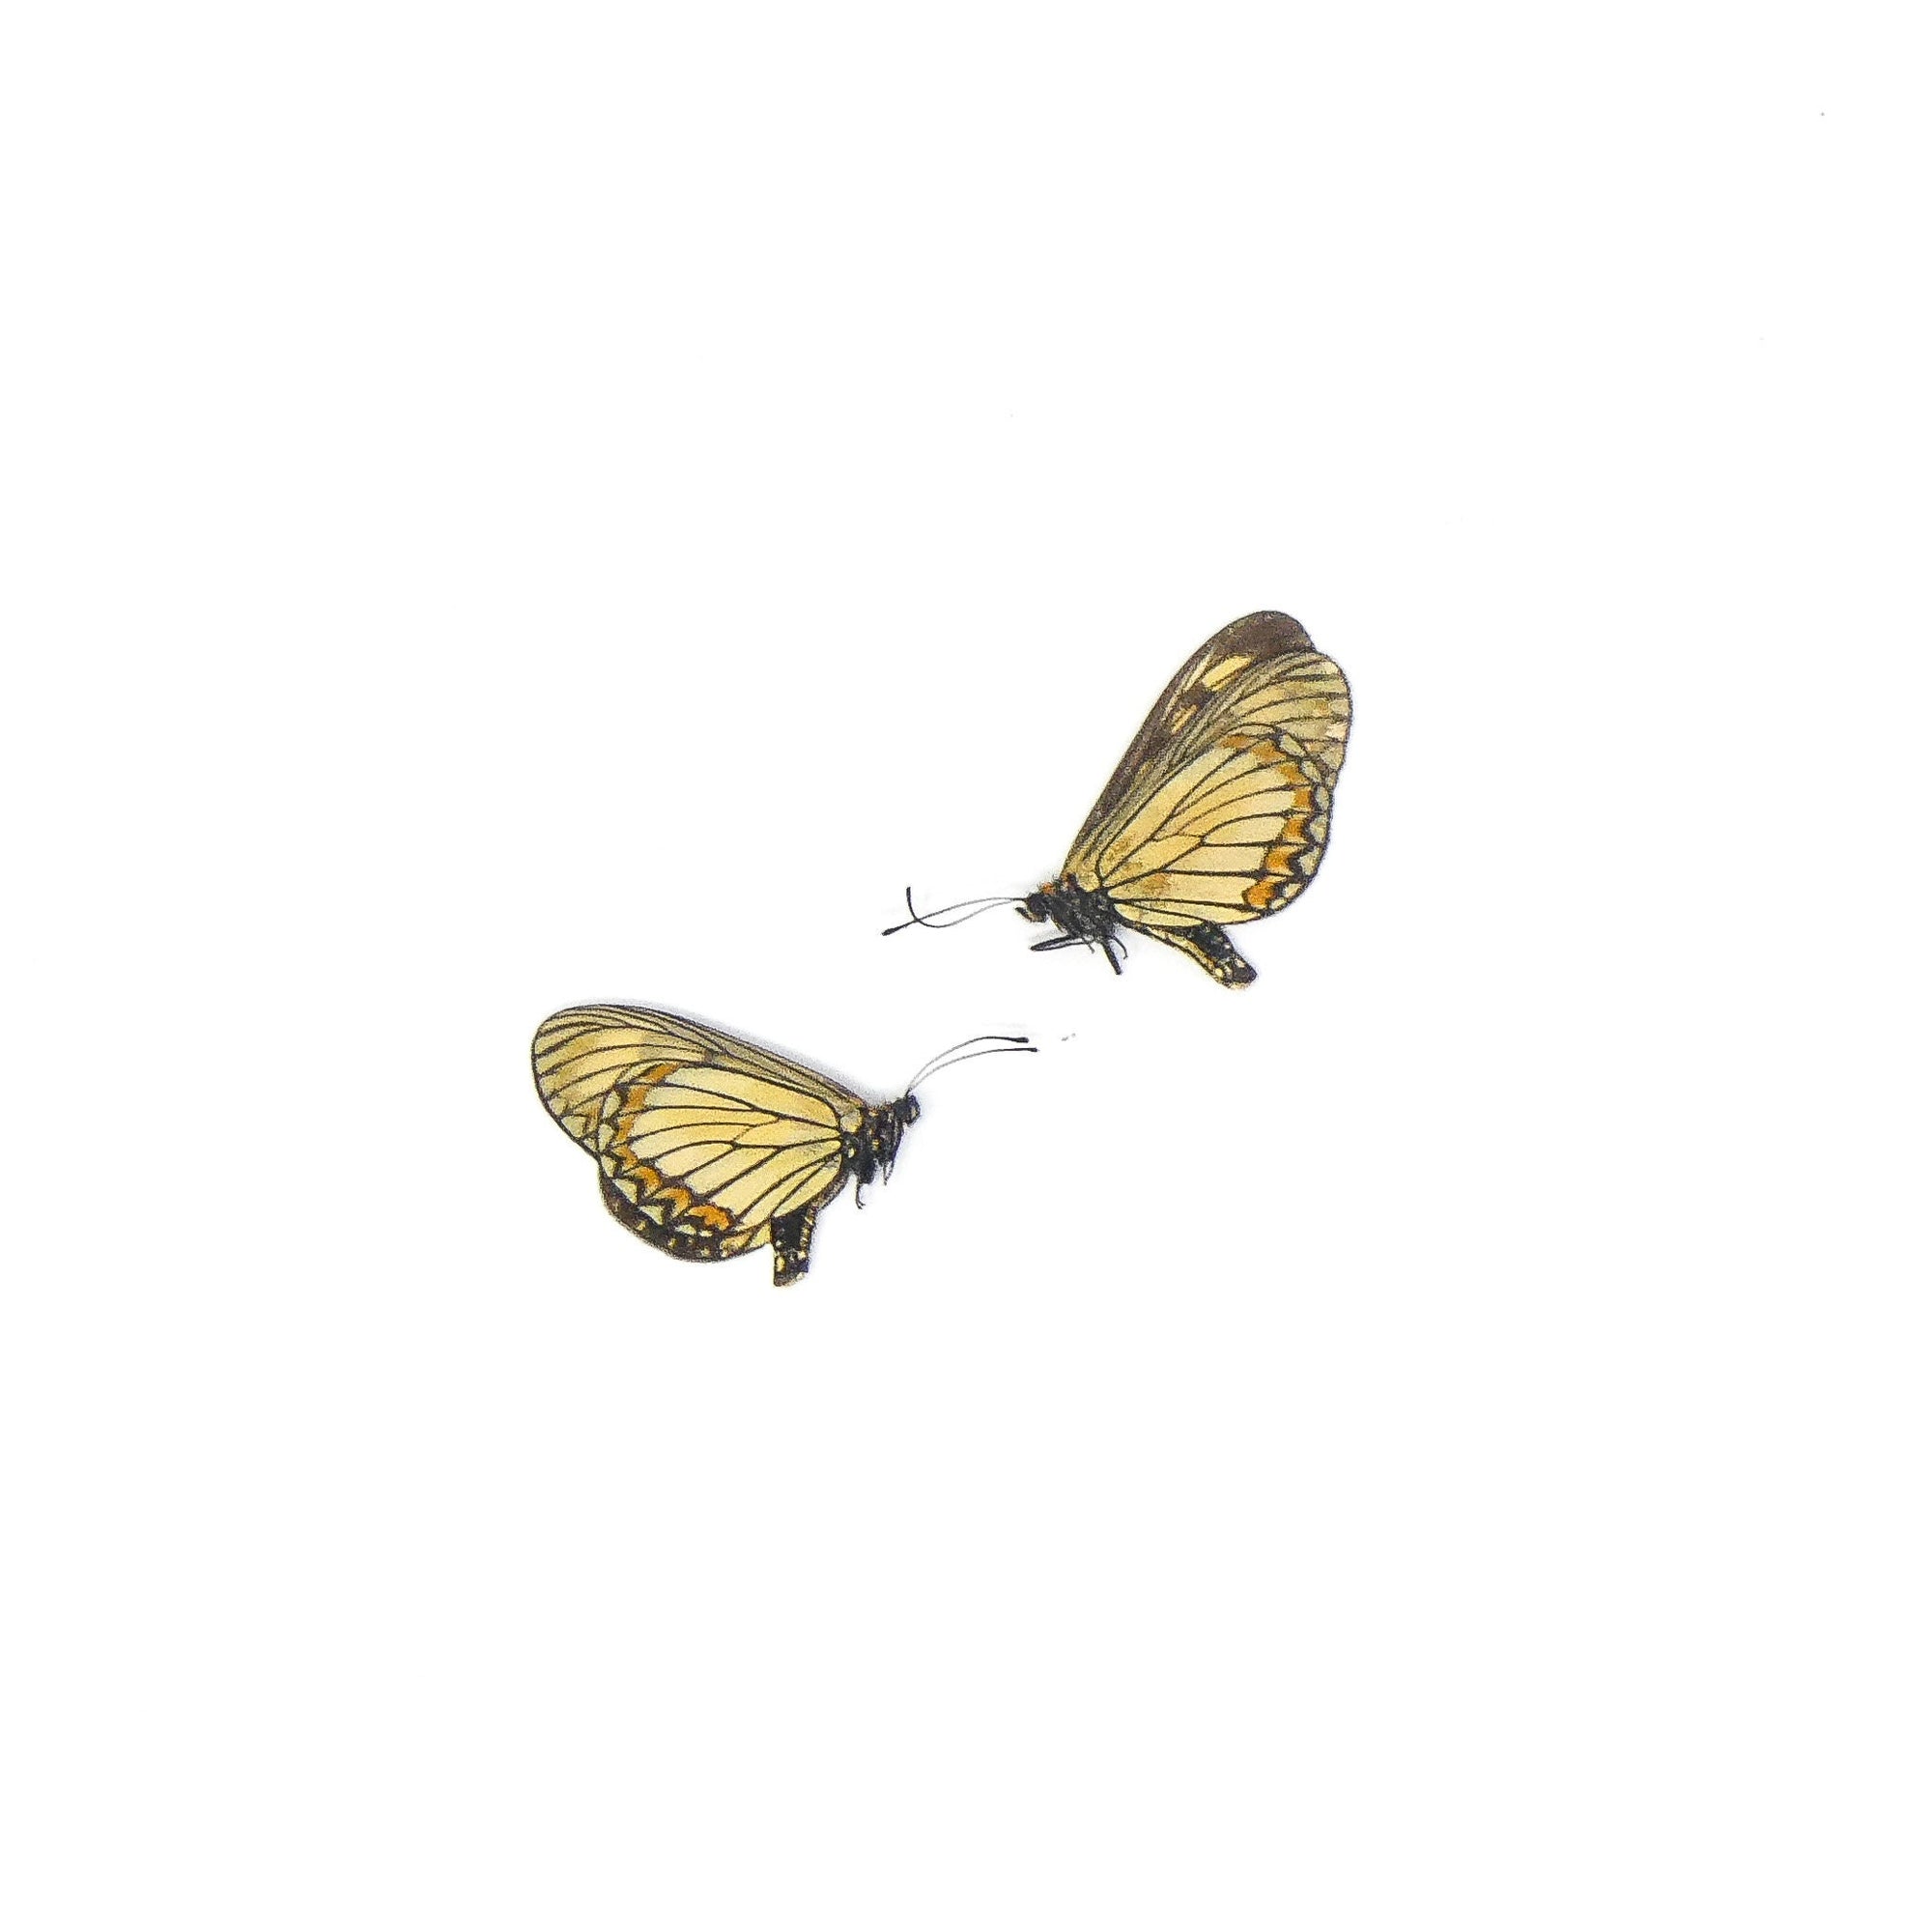 TWO (2) Acraea issoria, The Yellow Coster | A1 Real Dry-Preserved Butterflies | Unmounted Entomology Taxidermy Specimens